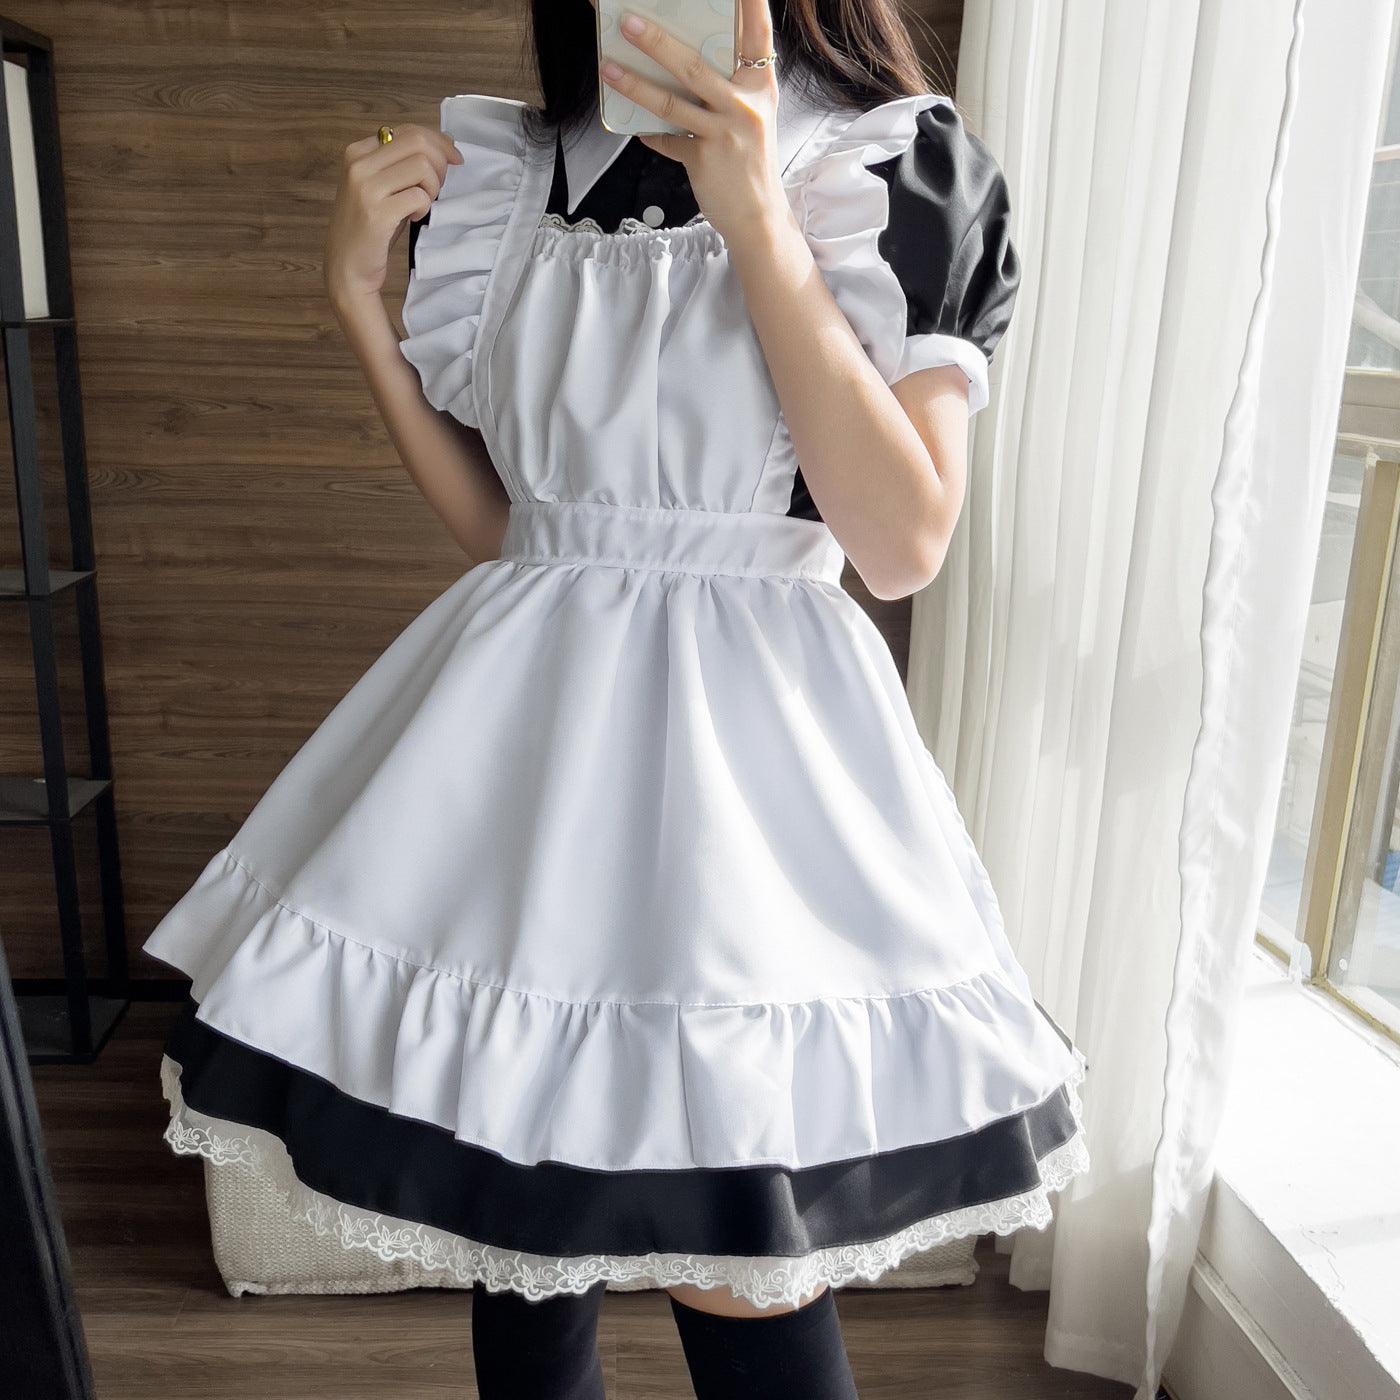 Coffee Waitress Large Size Maid Outfit Lolita Dress for Woman Man Fancy Cosplay Costume